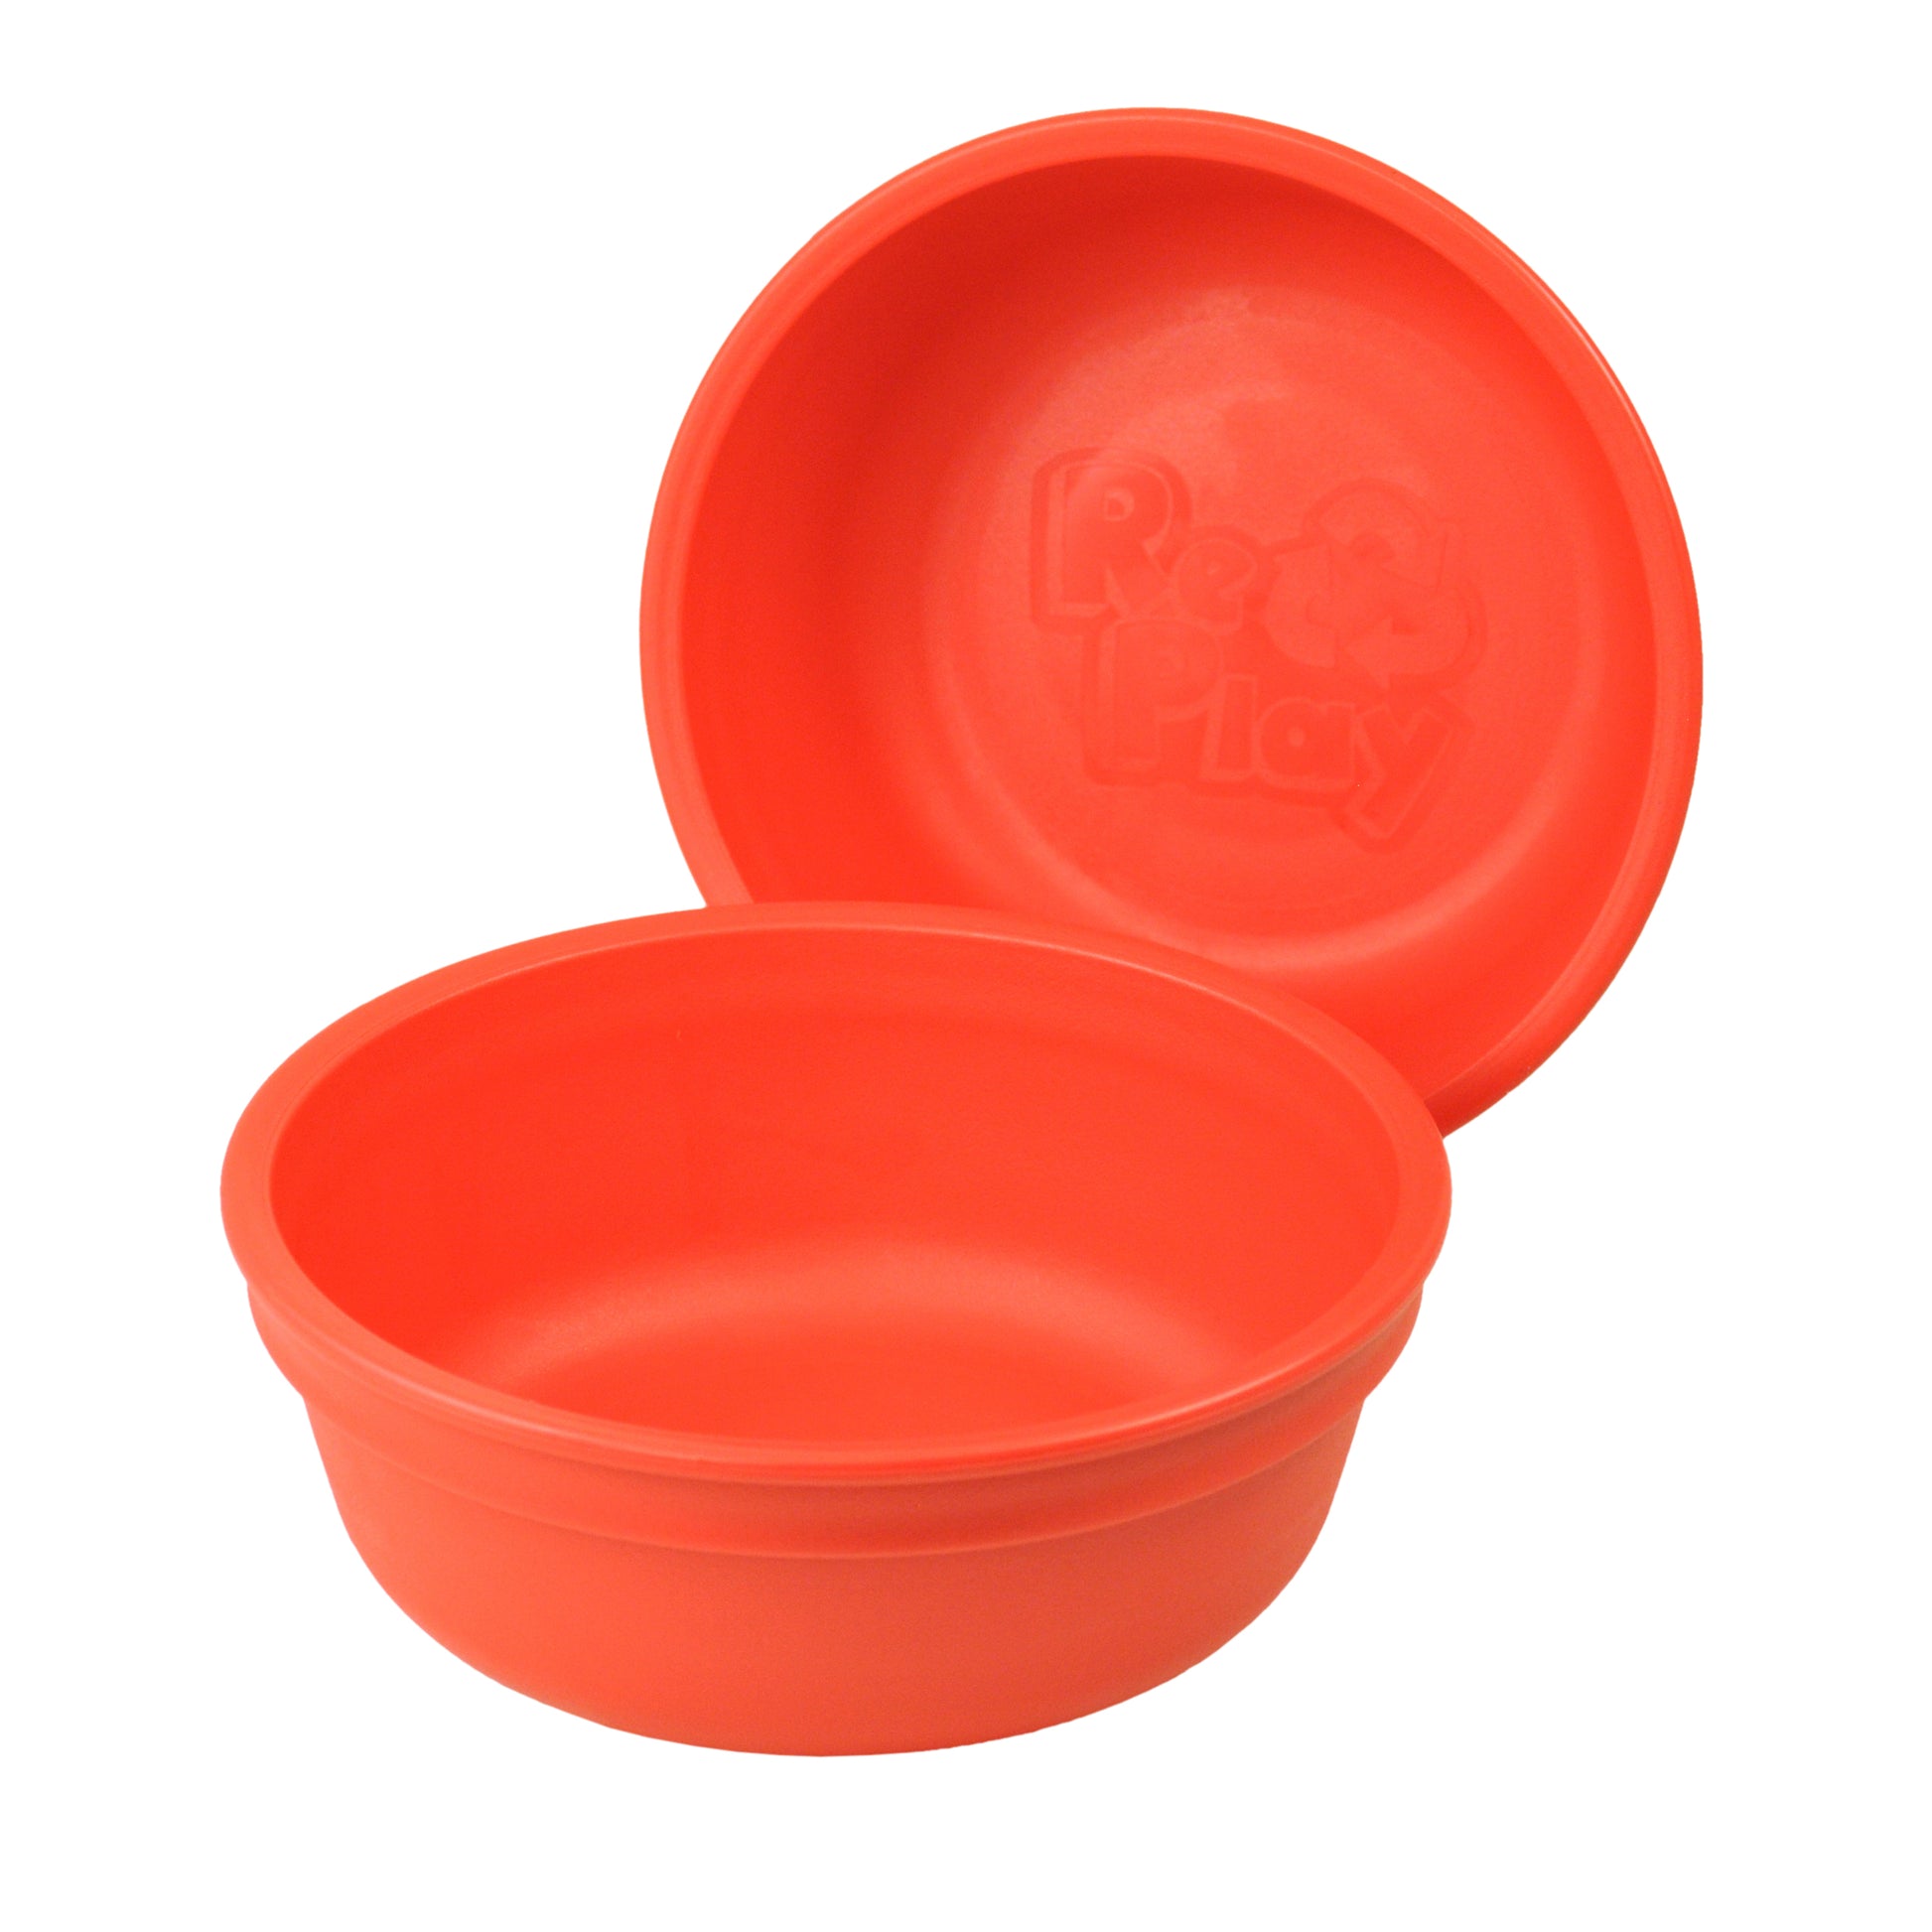 Re-Play Bowl | Standard Size in Red from Bear & Moo